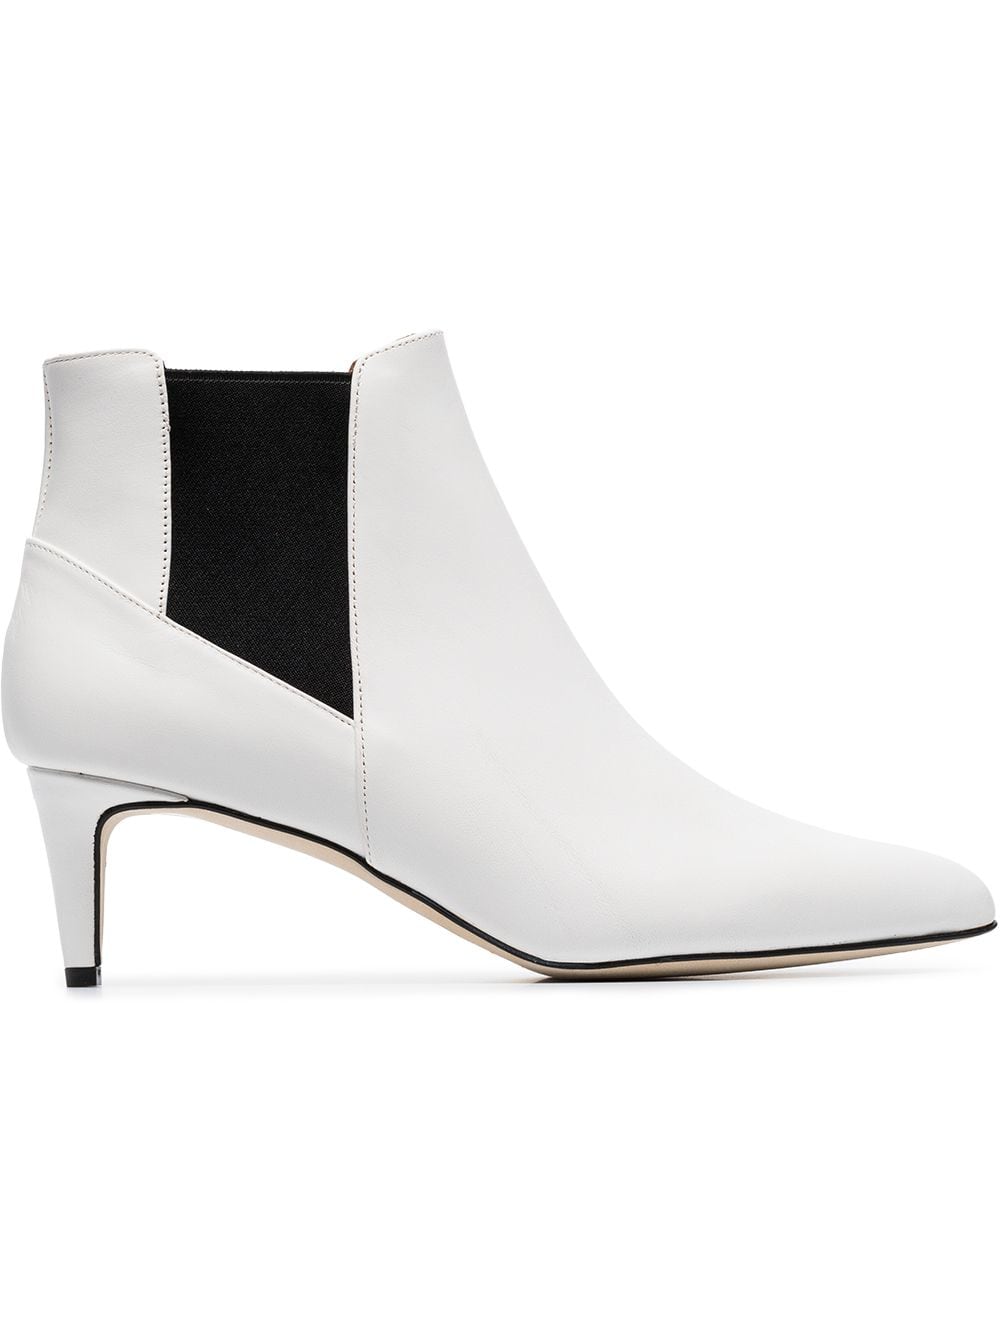 ATP Atelier - Cynara 55 Ankle Boots - White | ABOUT ICONS